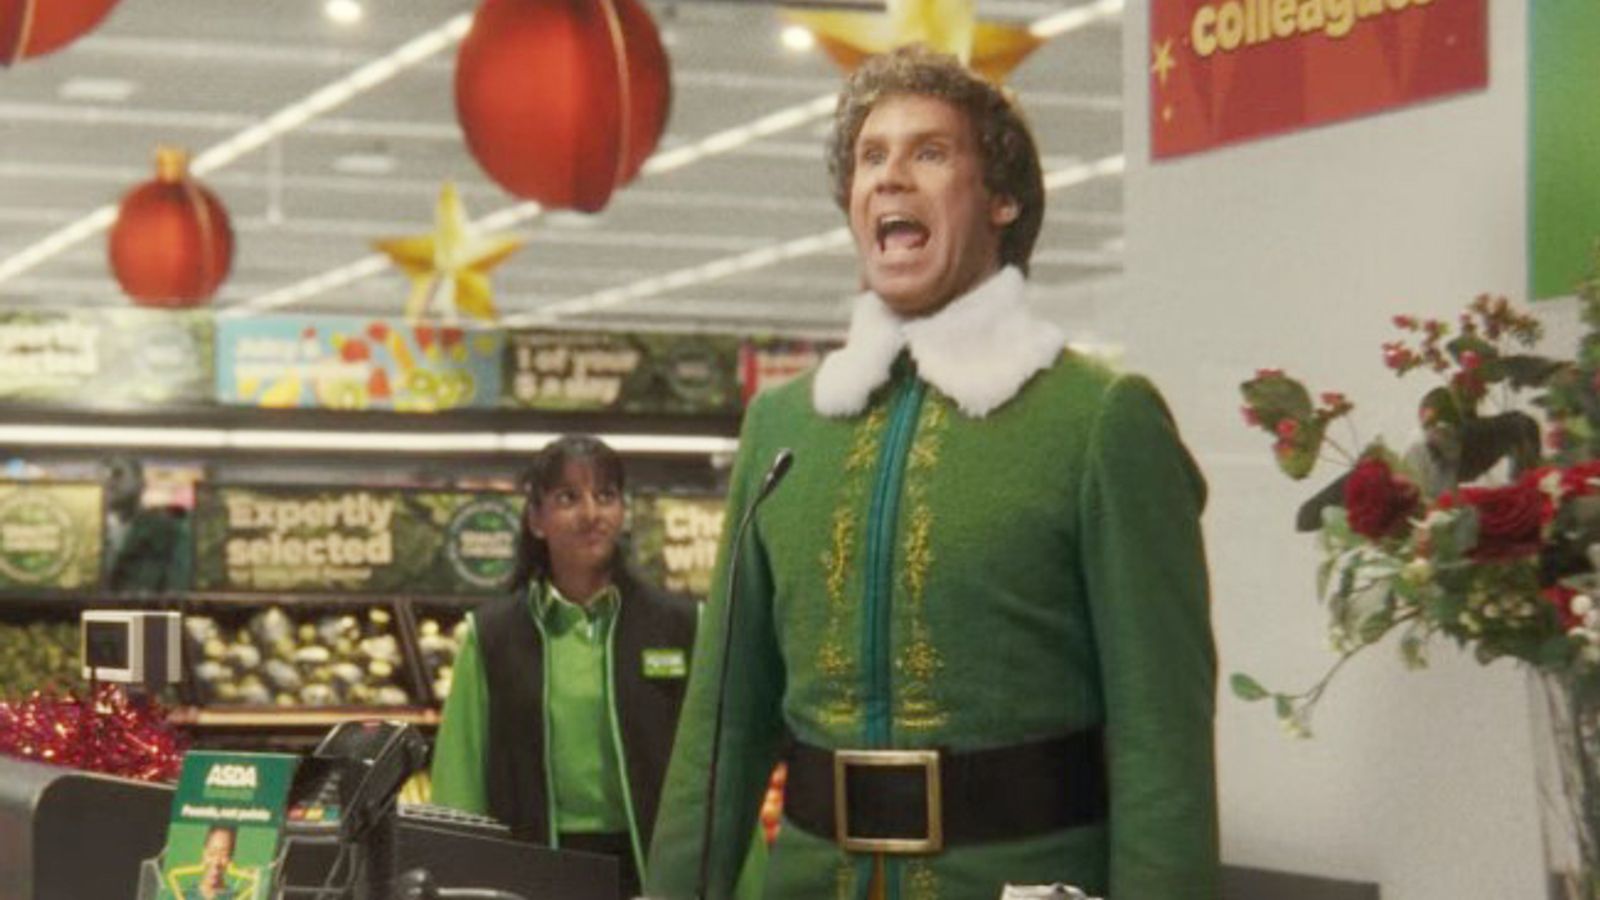 Will Ferrell stars as Buddy the Elf in Asda's Christmas advert Ents